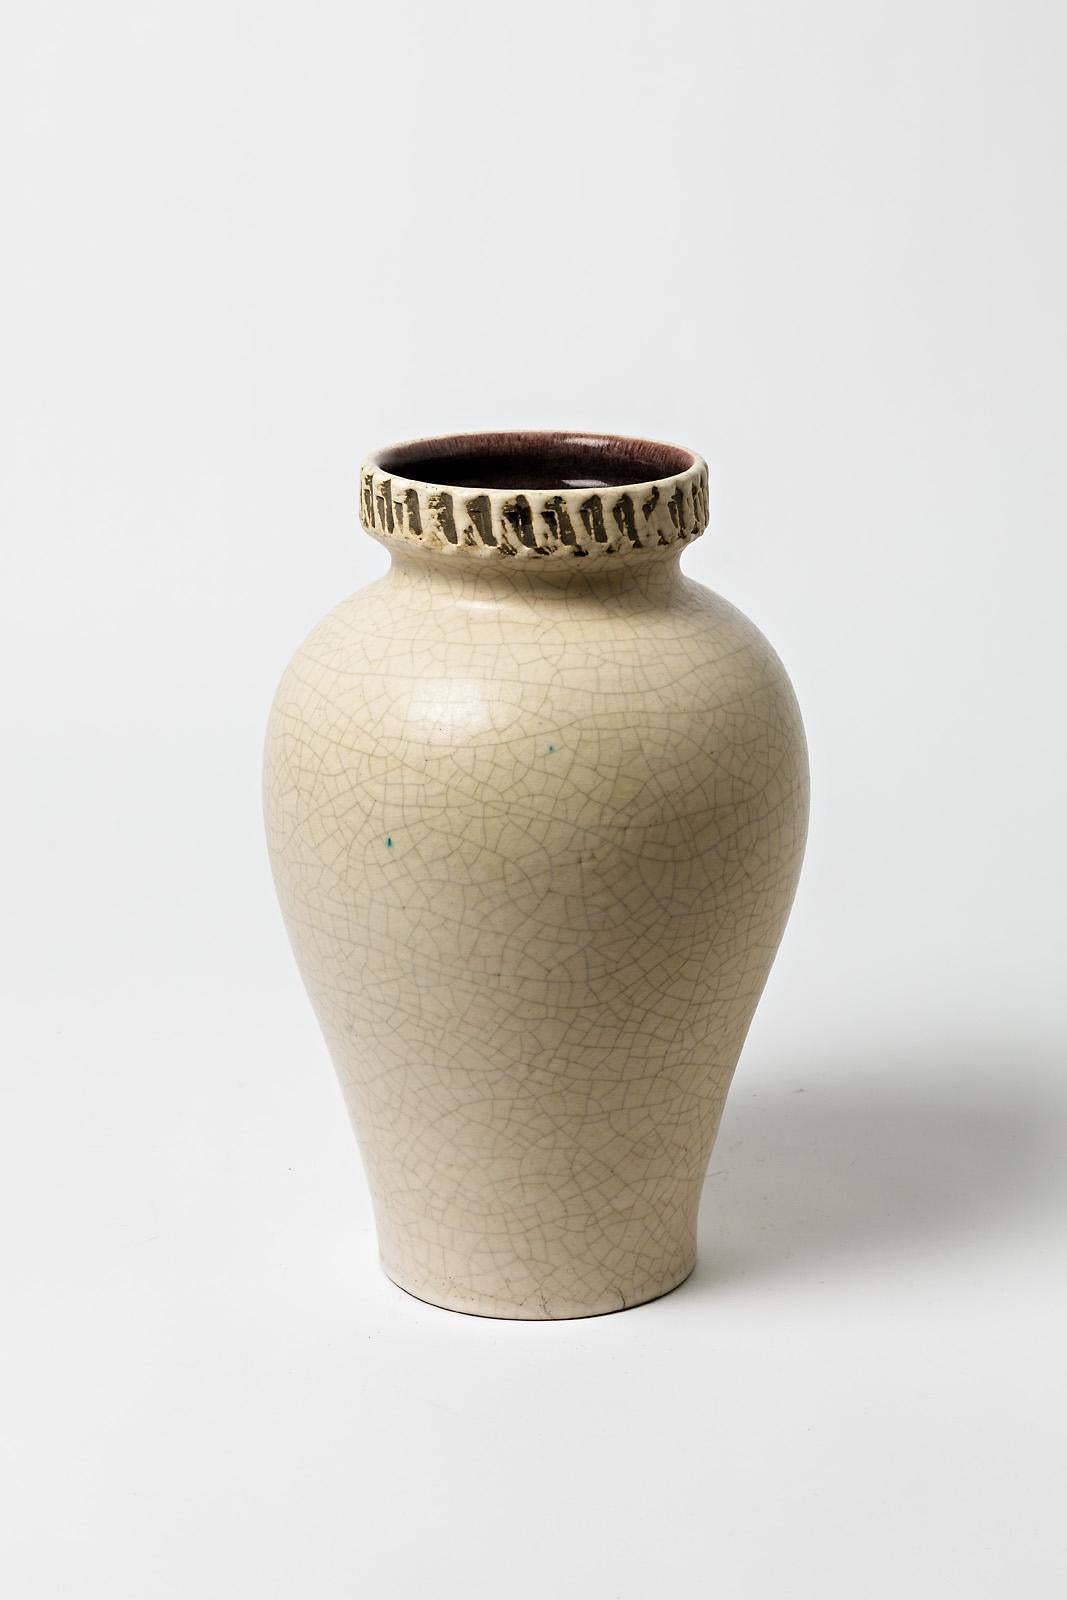 French Ceramic Vase Attributed to Pol Chambost with White Glaze Decoration For Sale